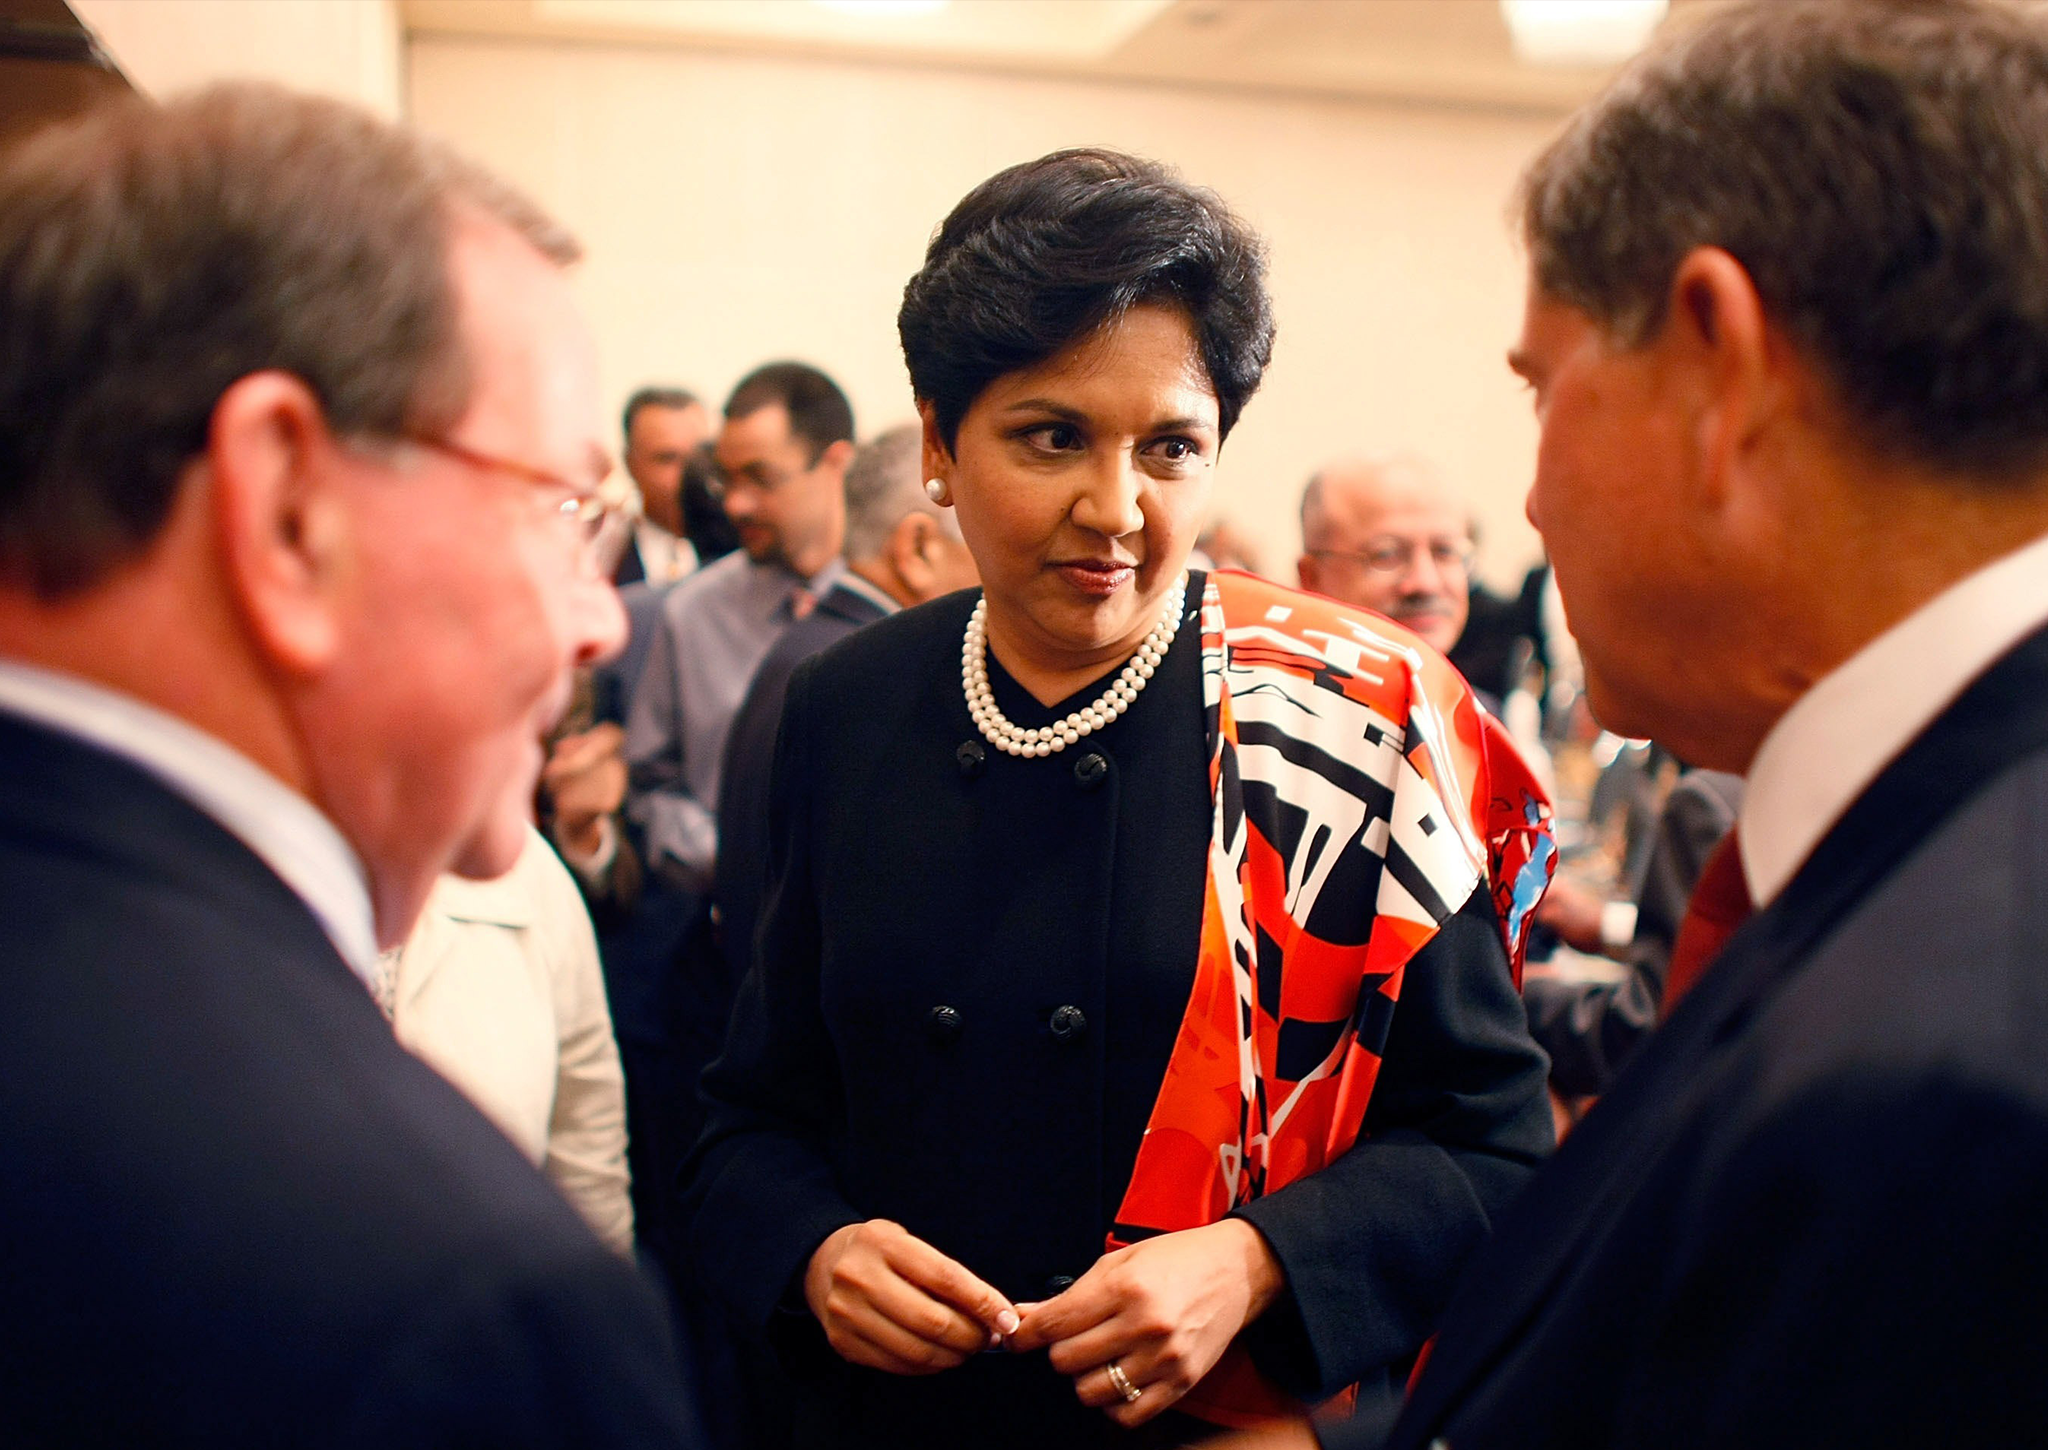 PepsiCo's CEO Indra Nooyi has come out as a vocal opponent of obesity